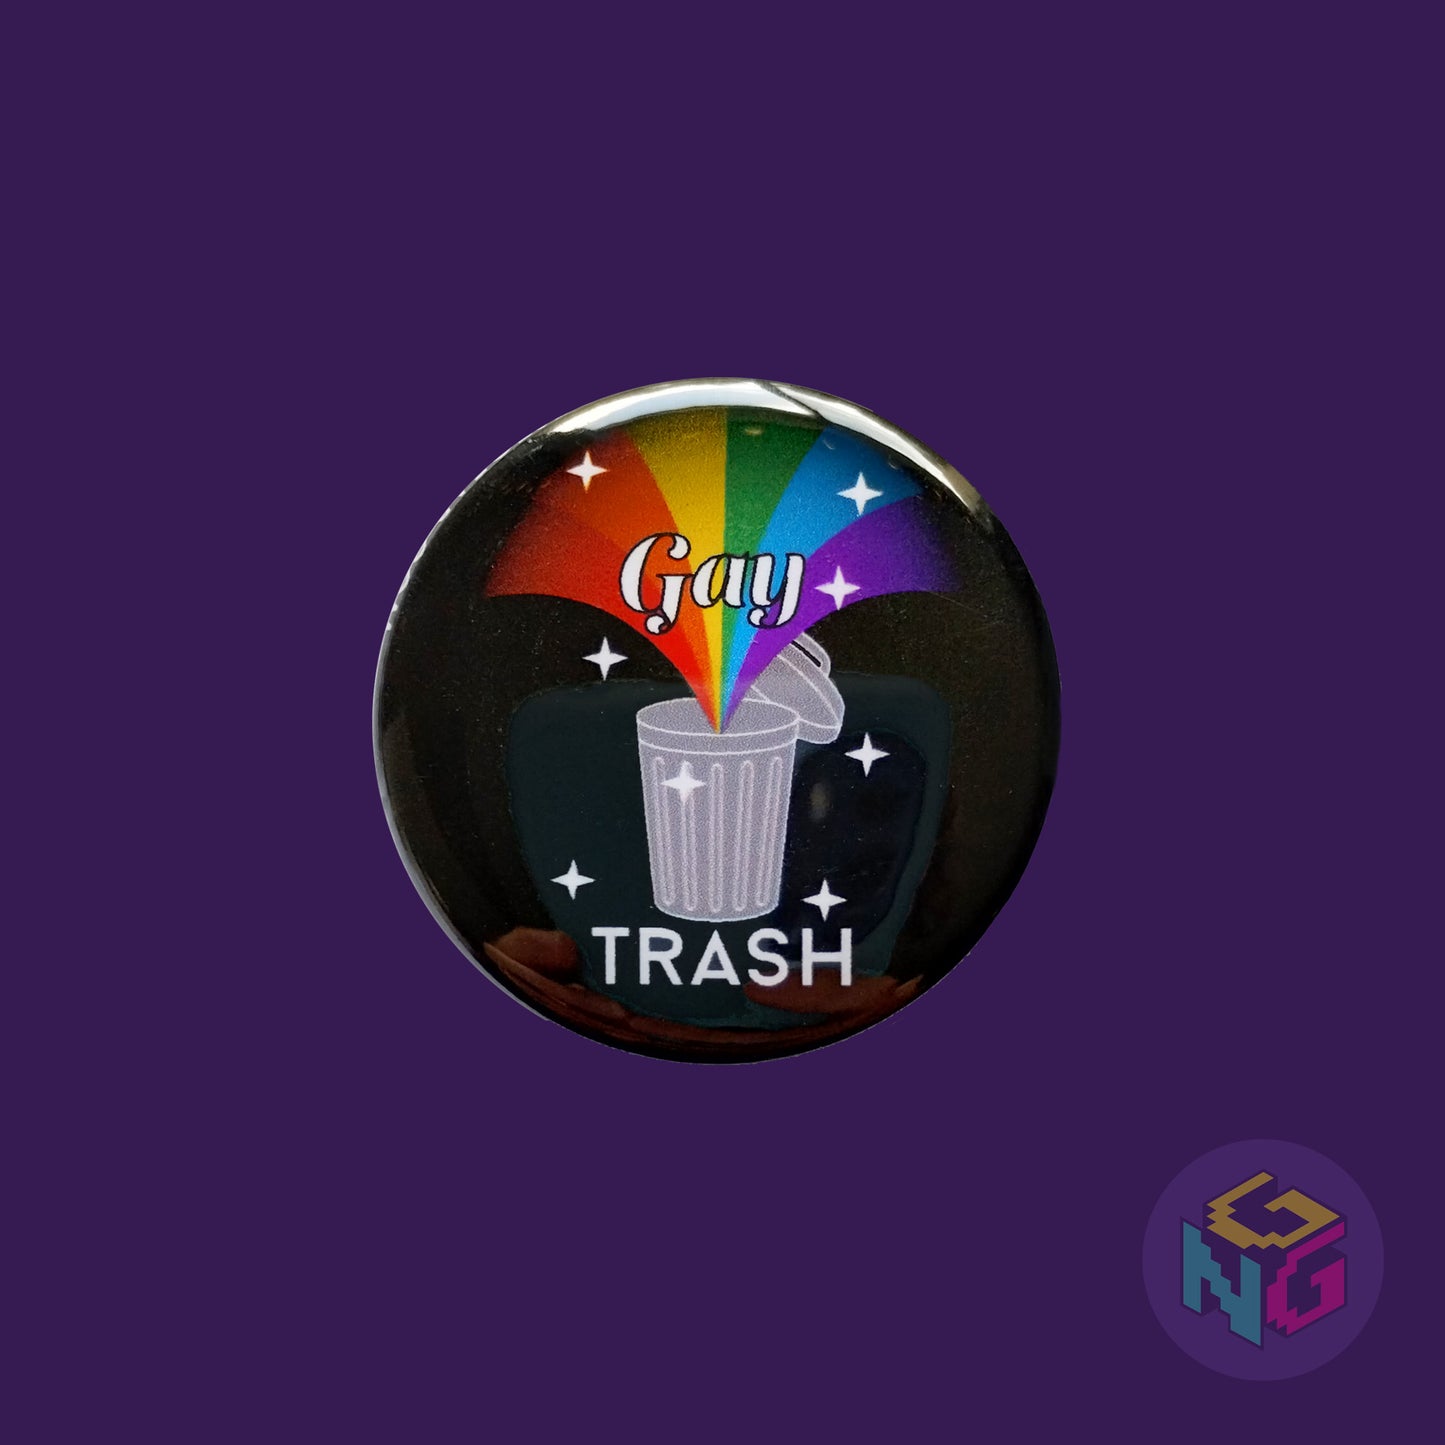 gay trash rainbow exploding out of trash can on dark purple background